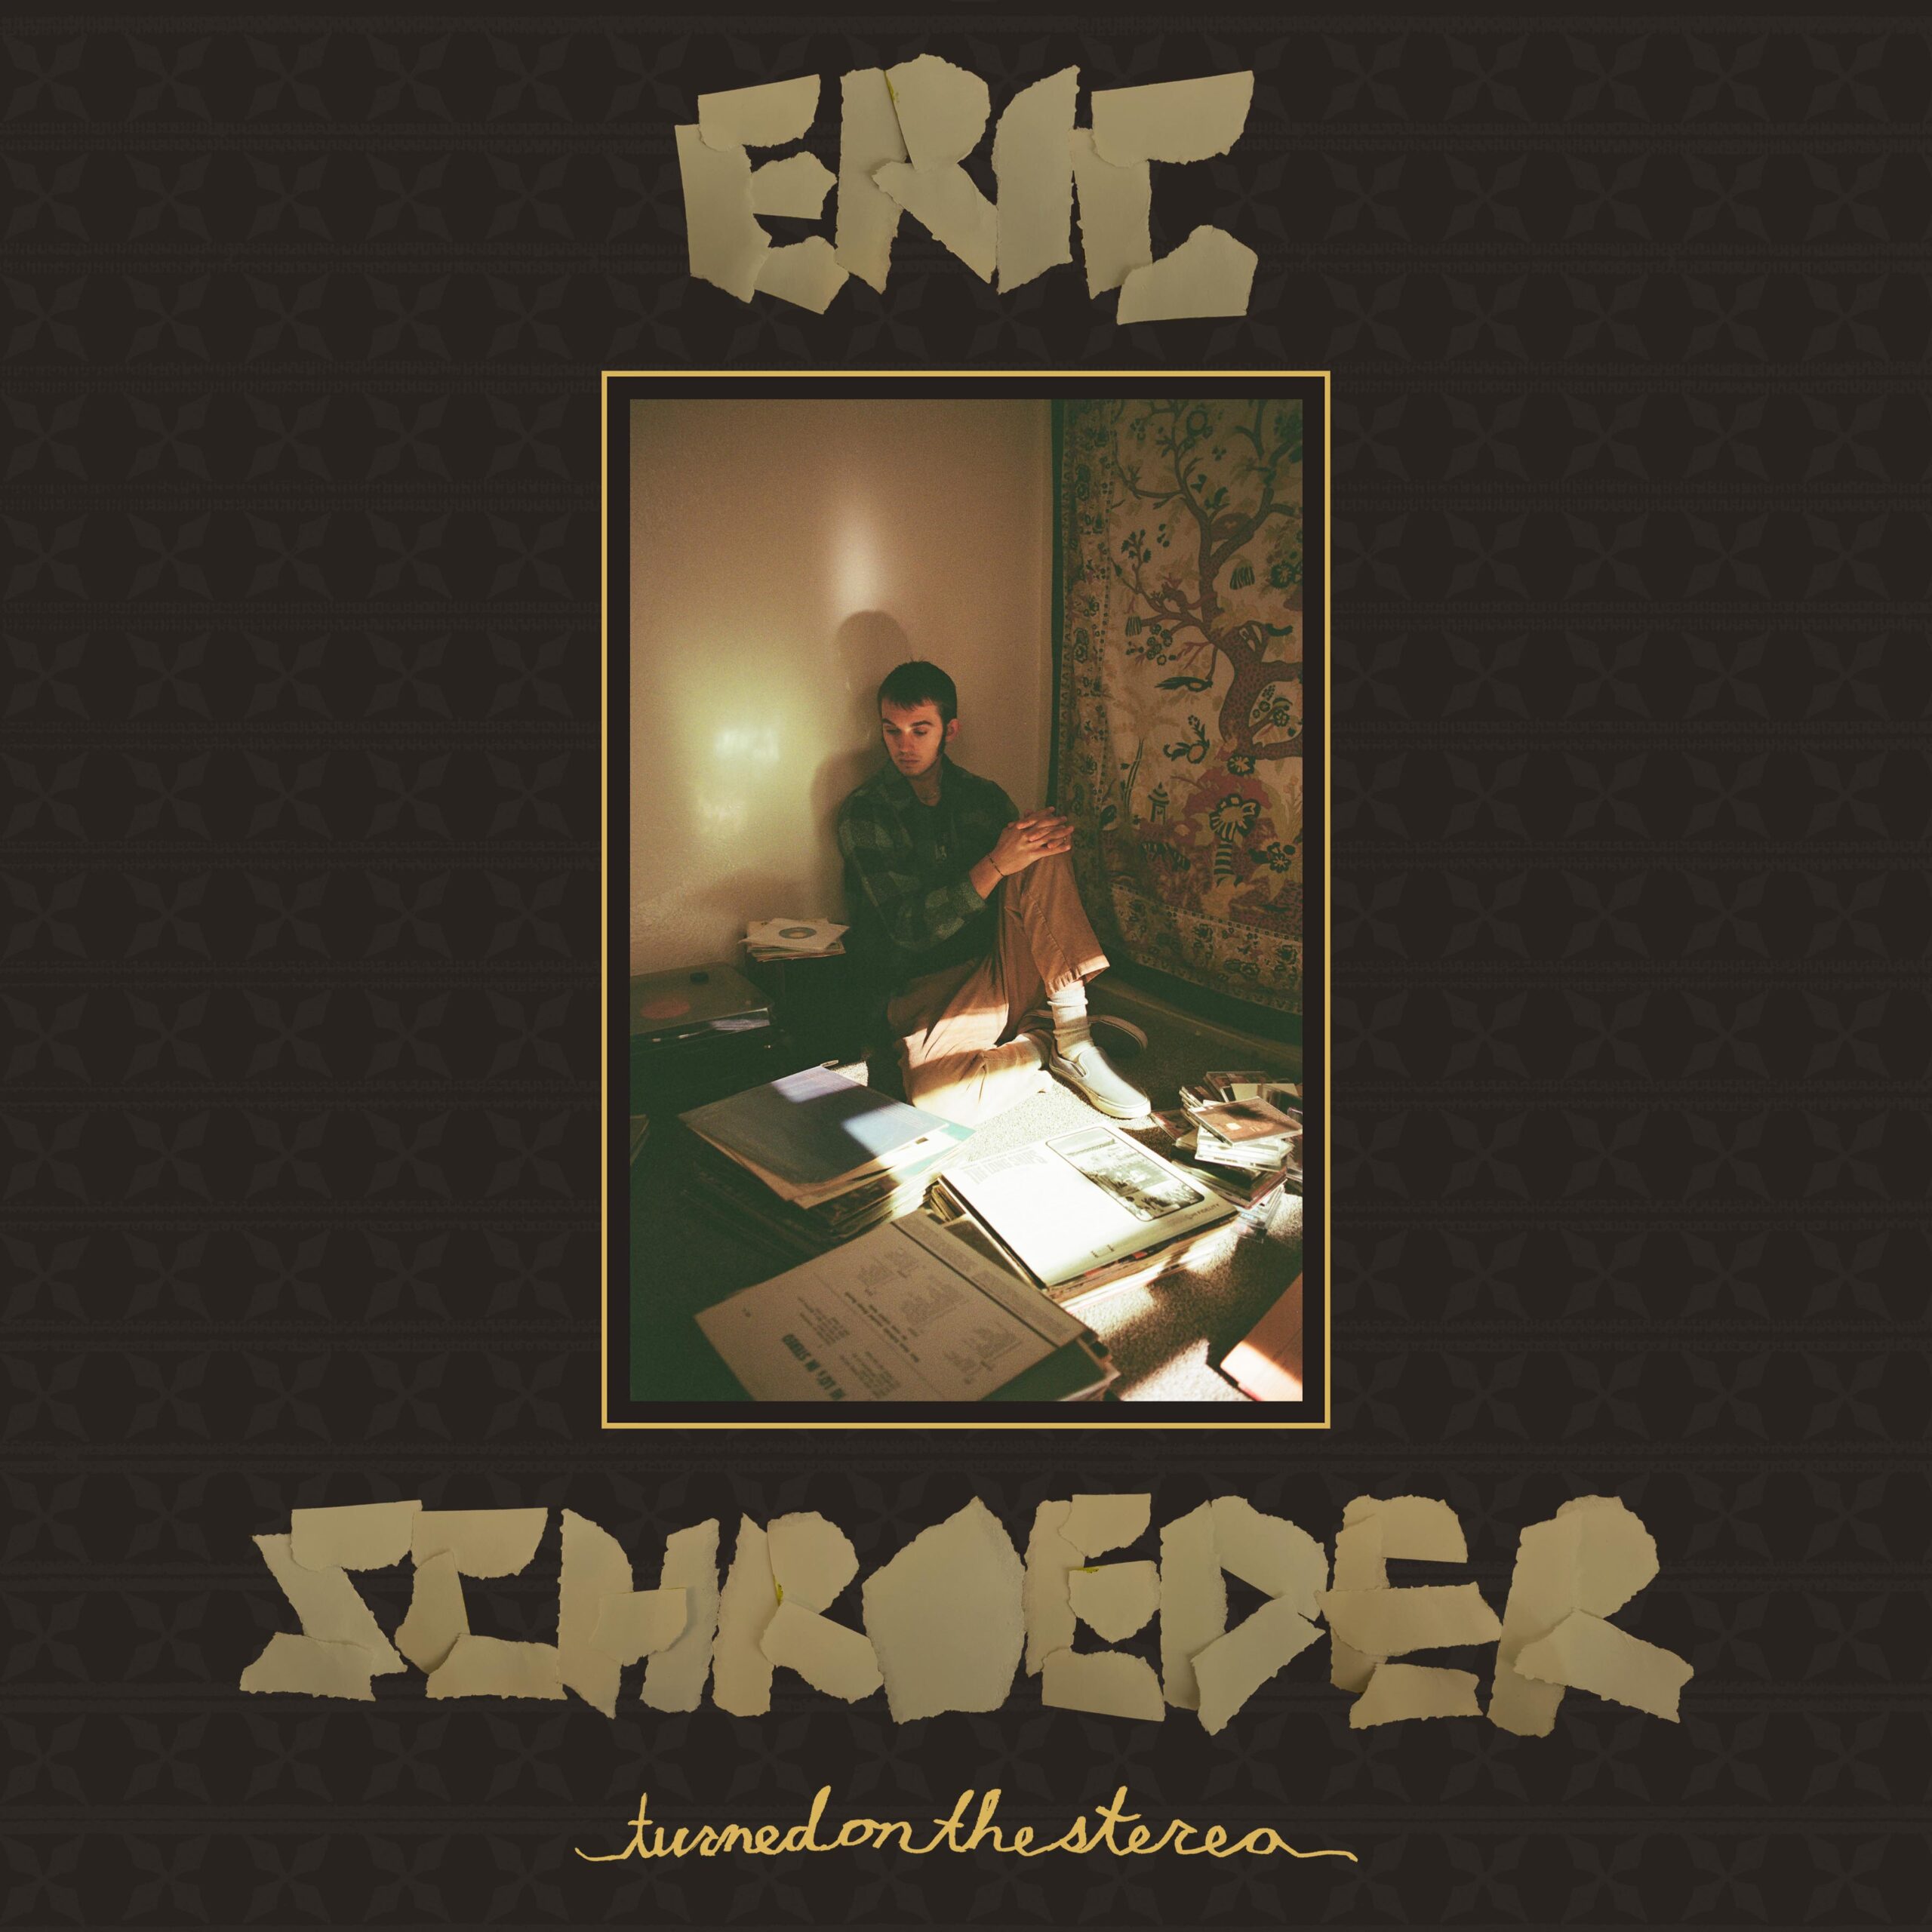  Eric Schroeder revoluciona el Pop-Rock con “Turned On the Stereo”